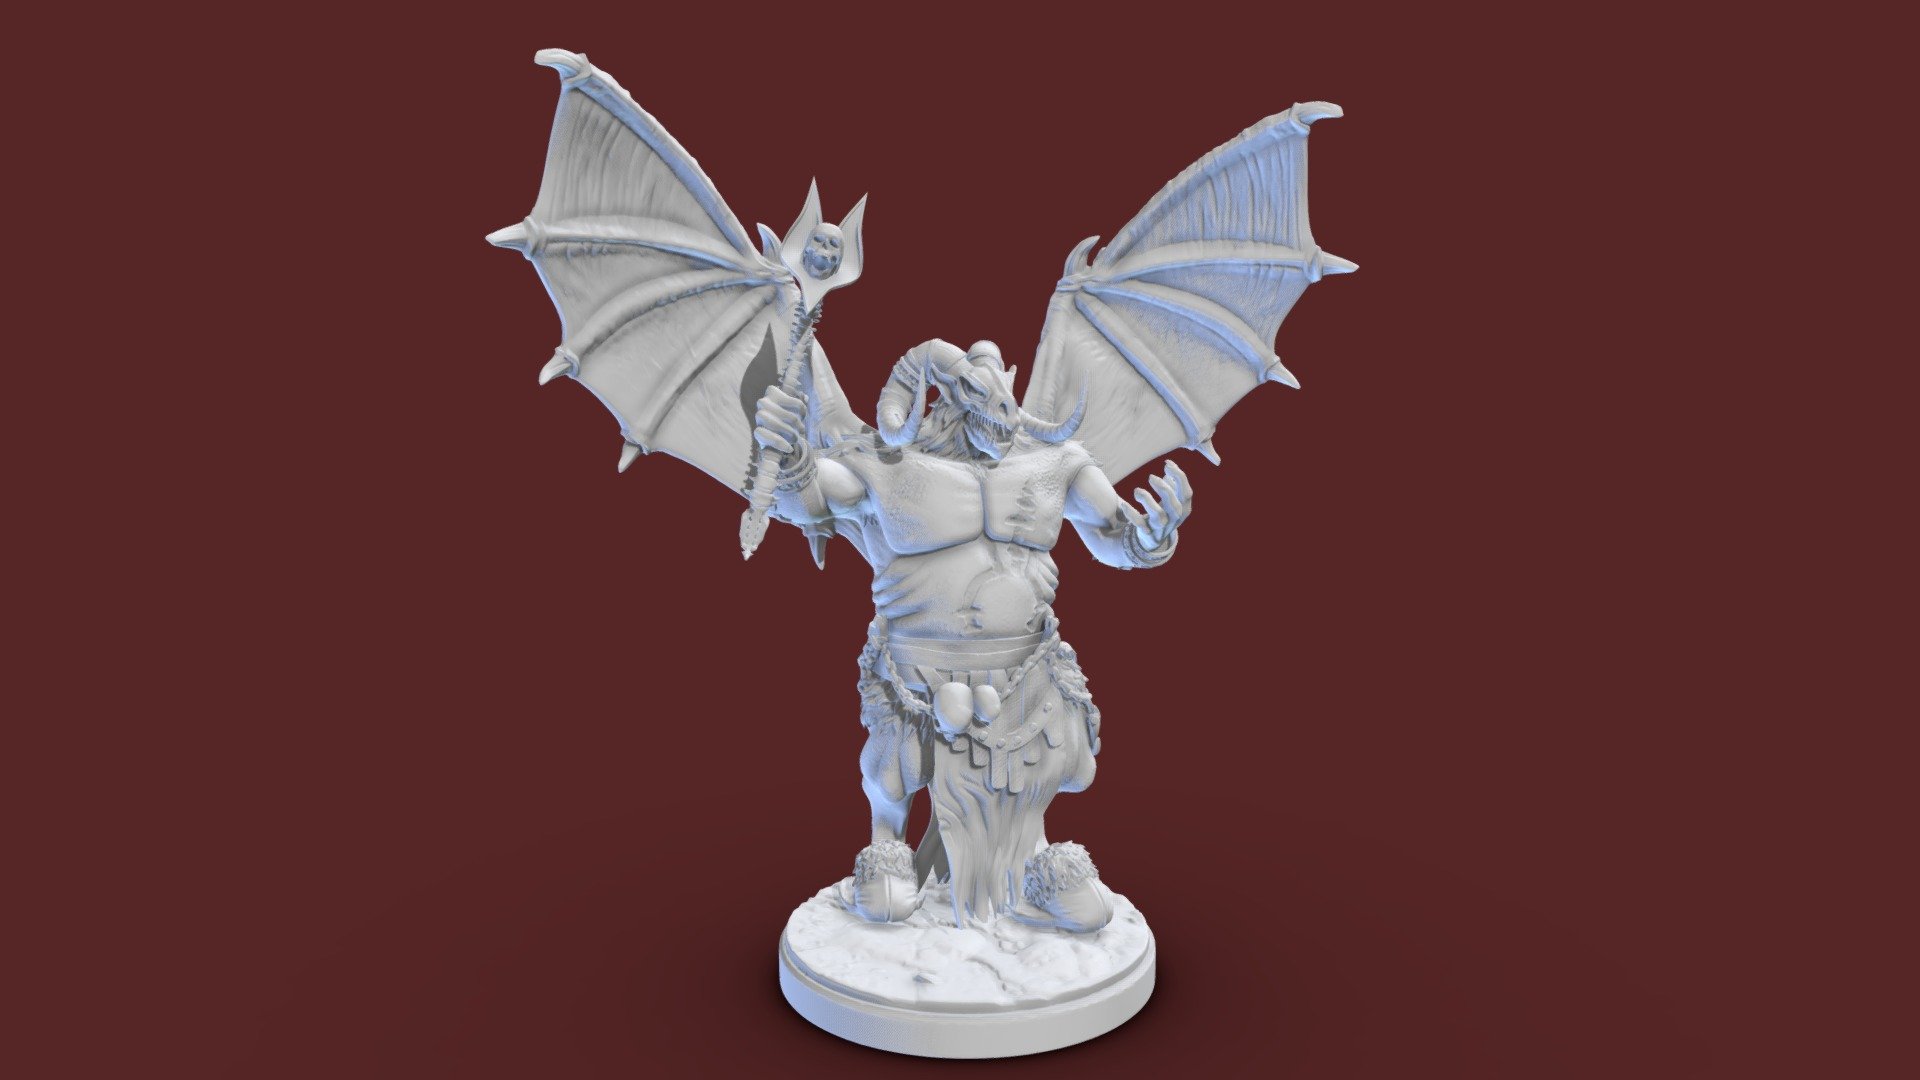 Demon Lord miniature split for easy print. Both pre-supported and unsupported files

Unleash Hell on your TTRPG campaign!

You may want to hollow some parts, like the Upper_Body, in order use less resin and have a lighter miniature

75mm base + 7 pieces

Private use only, non commercial, no derivatives, do not share this file under any circumstances, for free or commercially 3d model